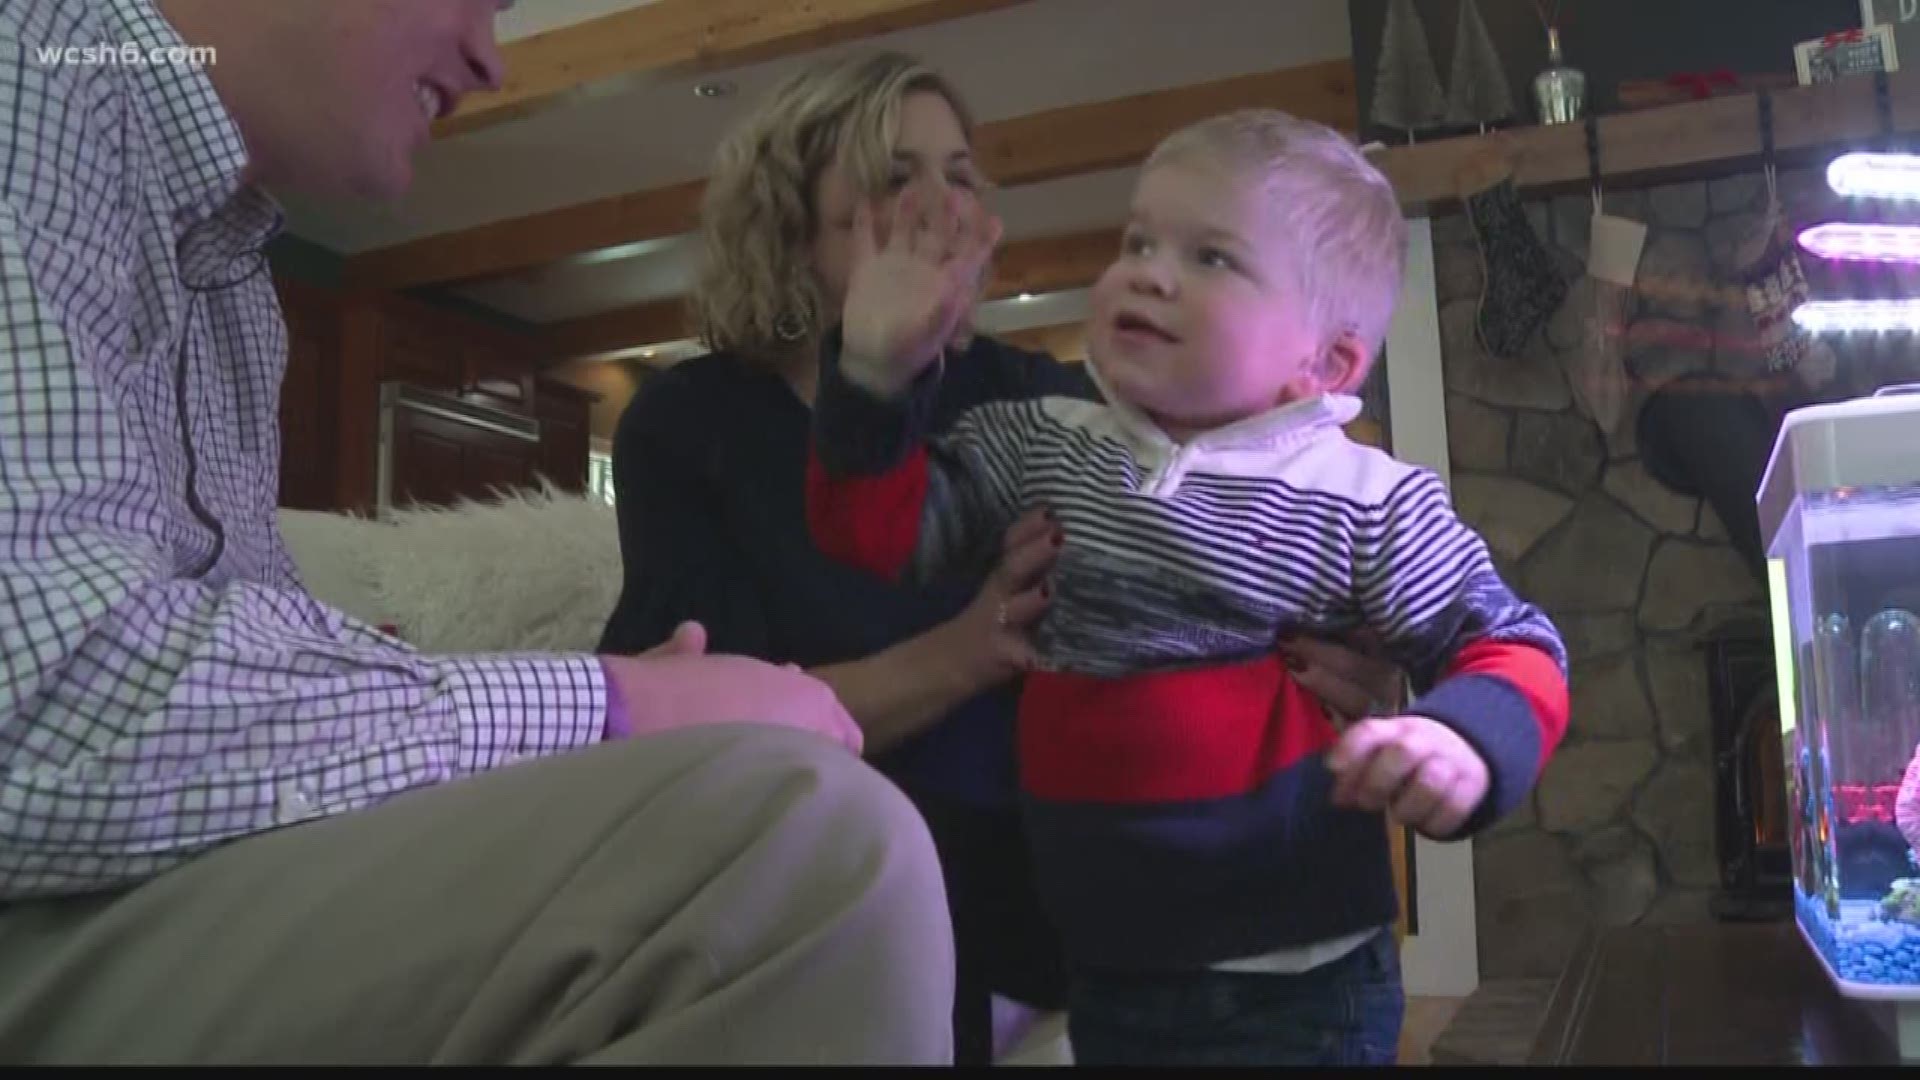 Local Three-Year-Old Has Syndrome Known as "Childhood Alzheimer's"